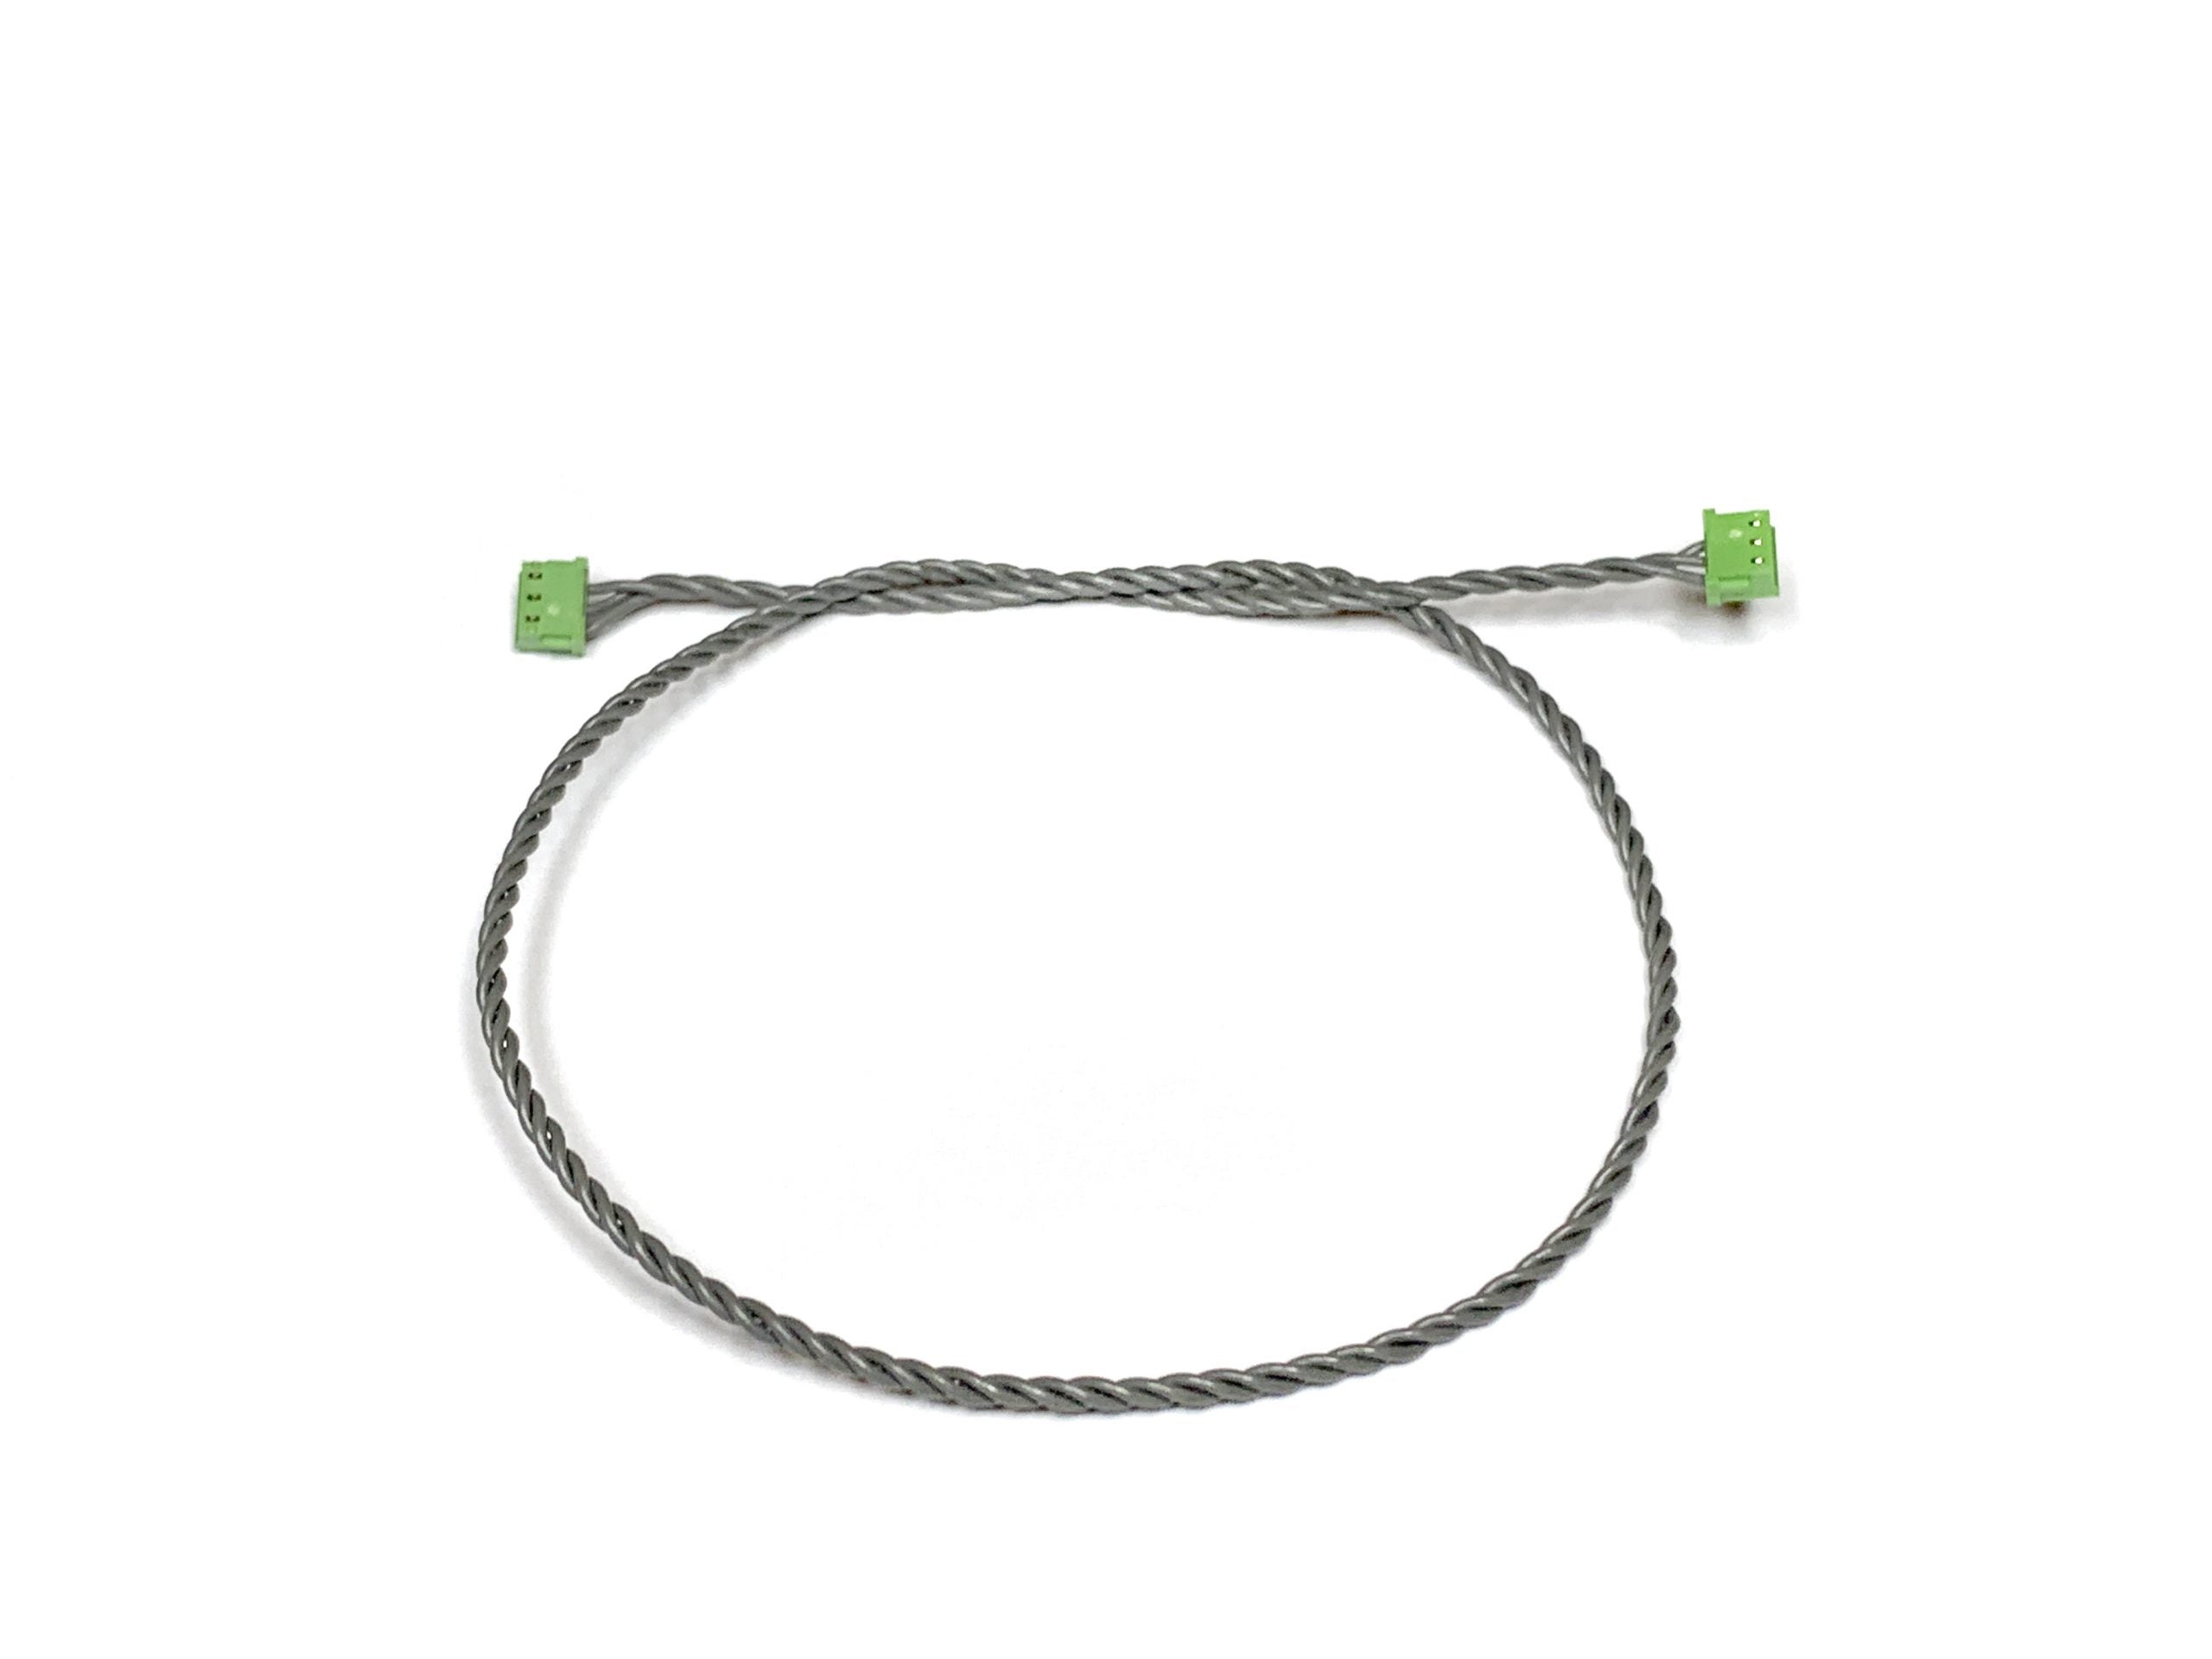 XGuard High-Reliability Terminal-Less 3-Conductor 12" Extension